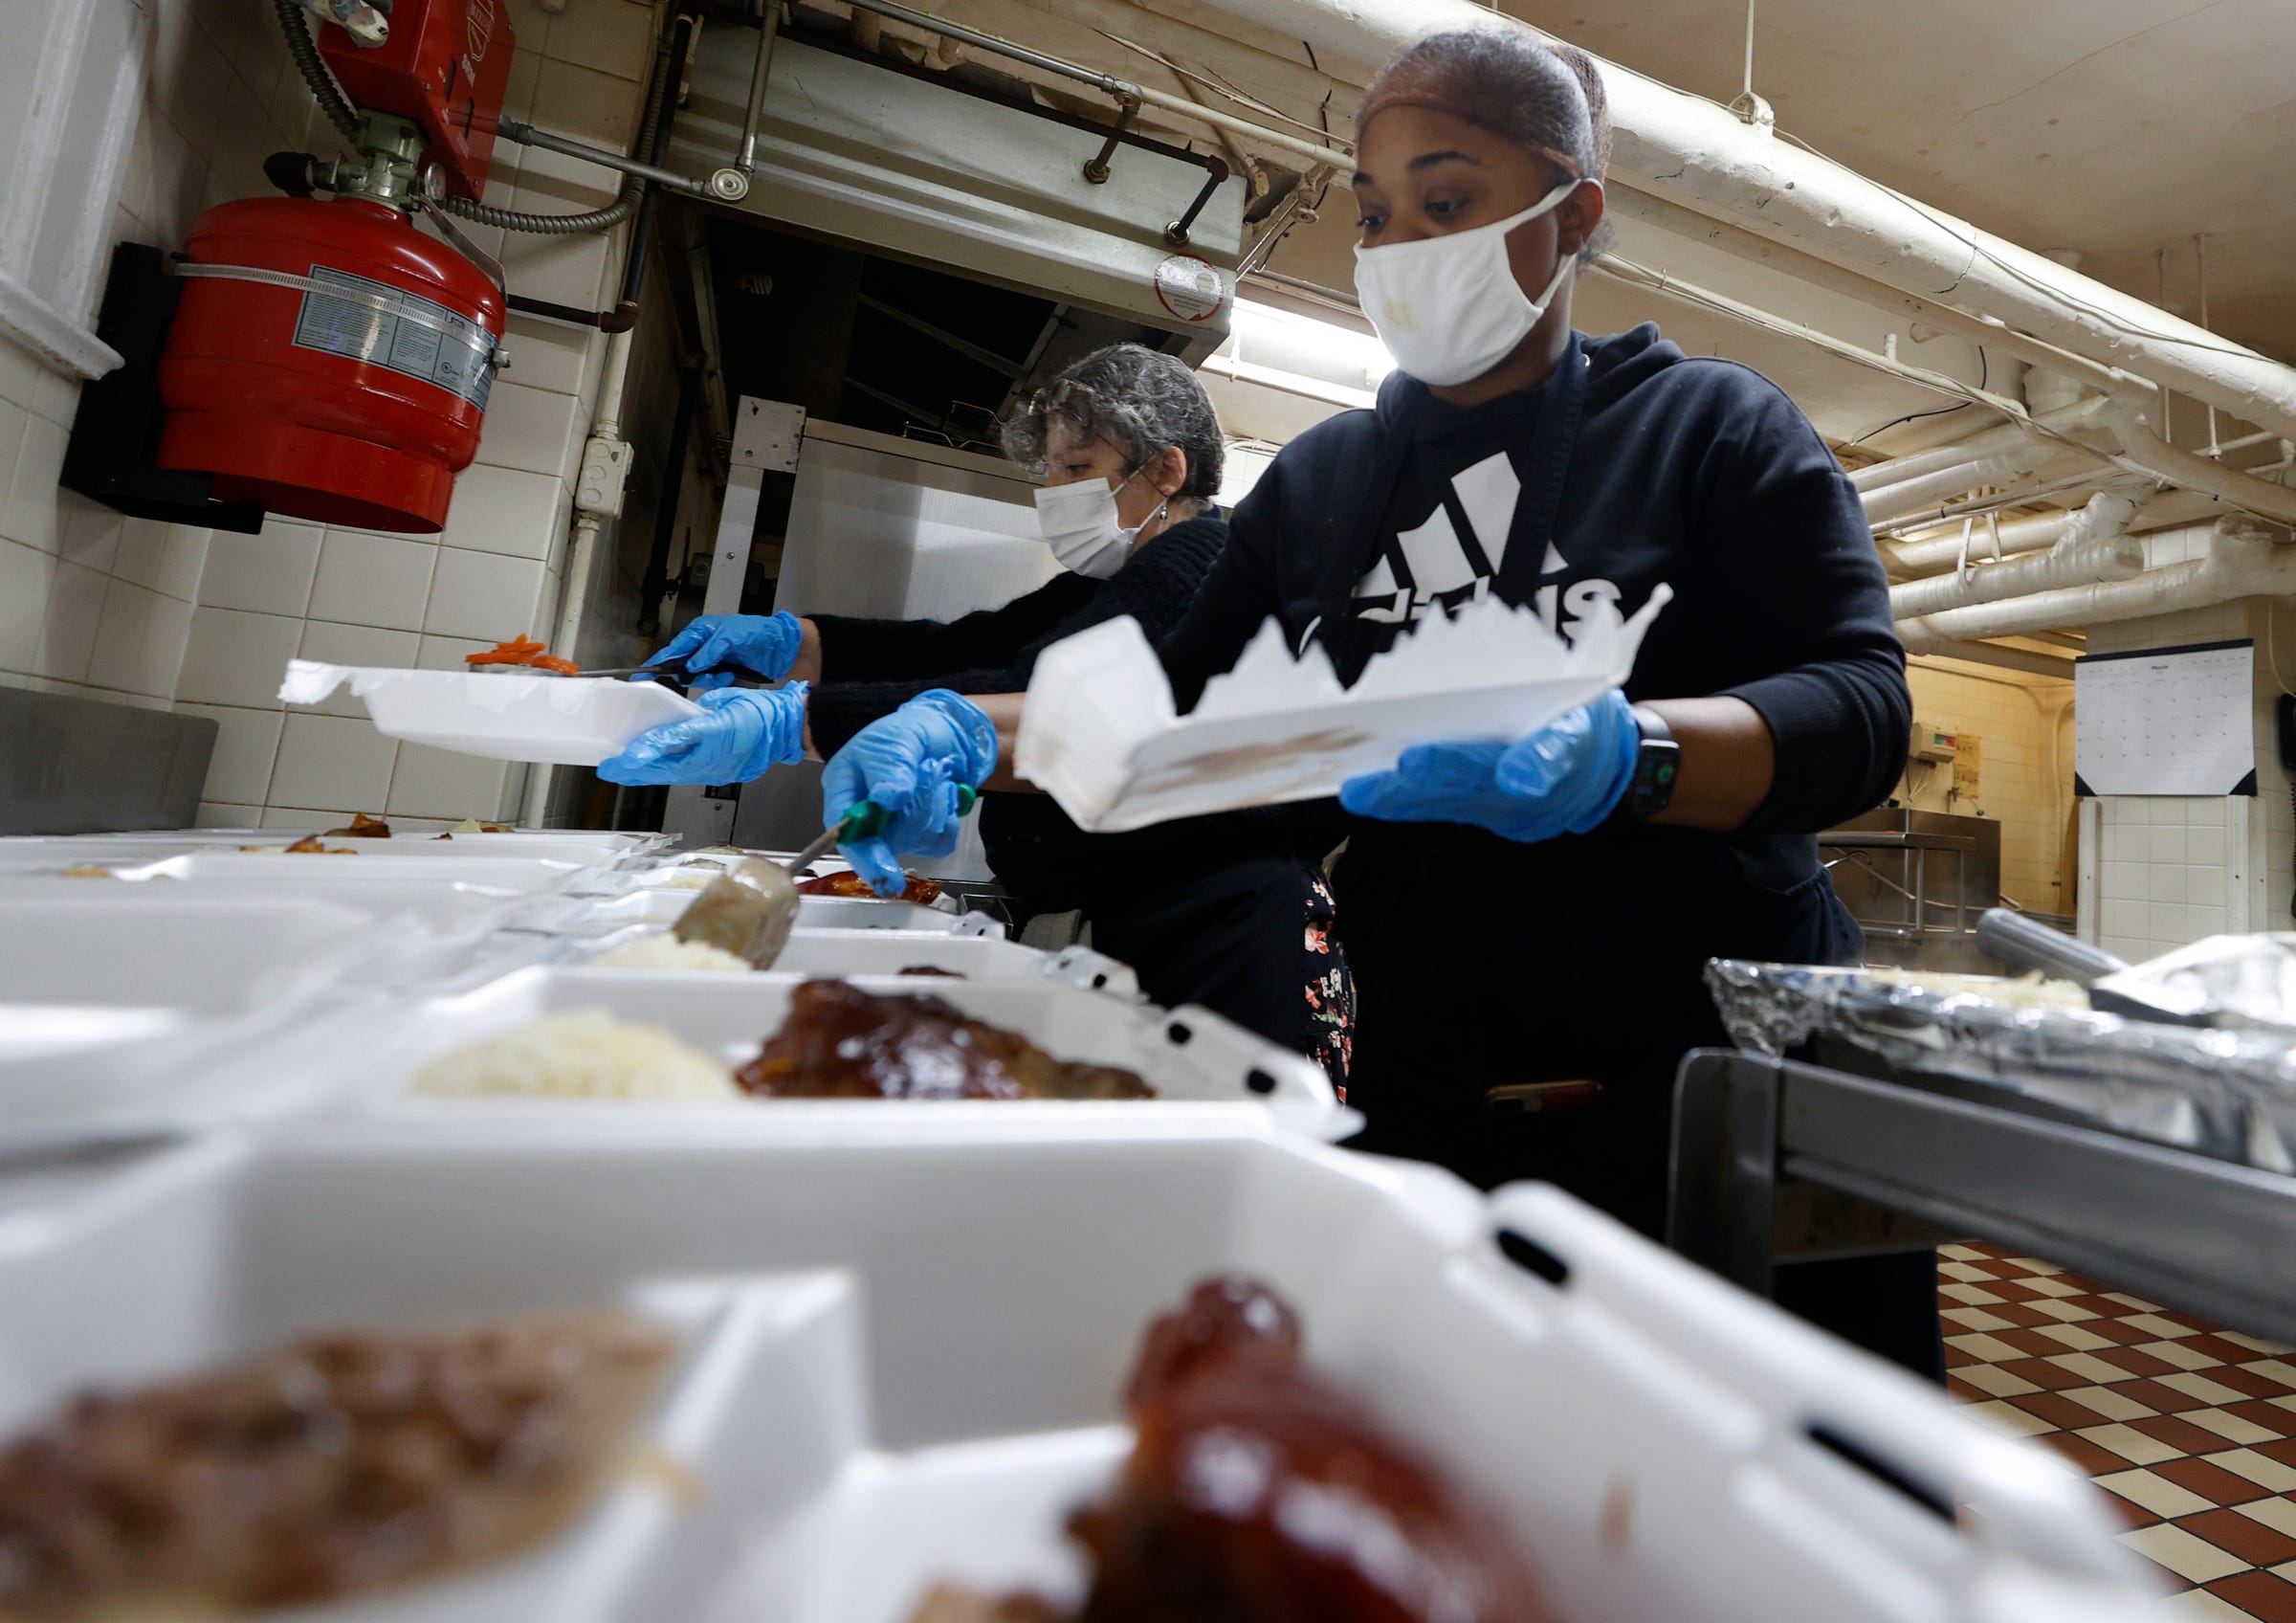 Temika Wallace, 36 of Detroit and the head chef, adds beans into to-go boxes for seniors as part of the meal program at the St. Patrick Senior Center in Detroit on Wednesday, March. 2, 2022.